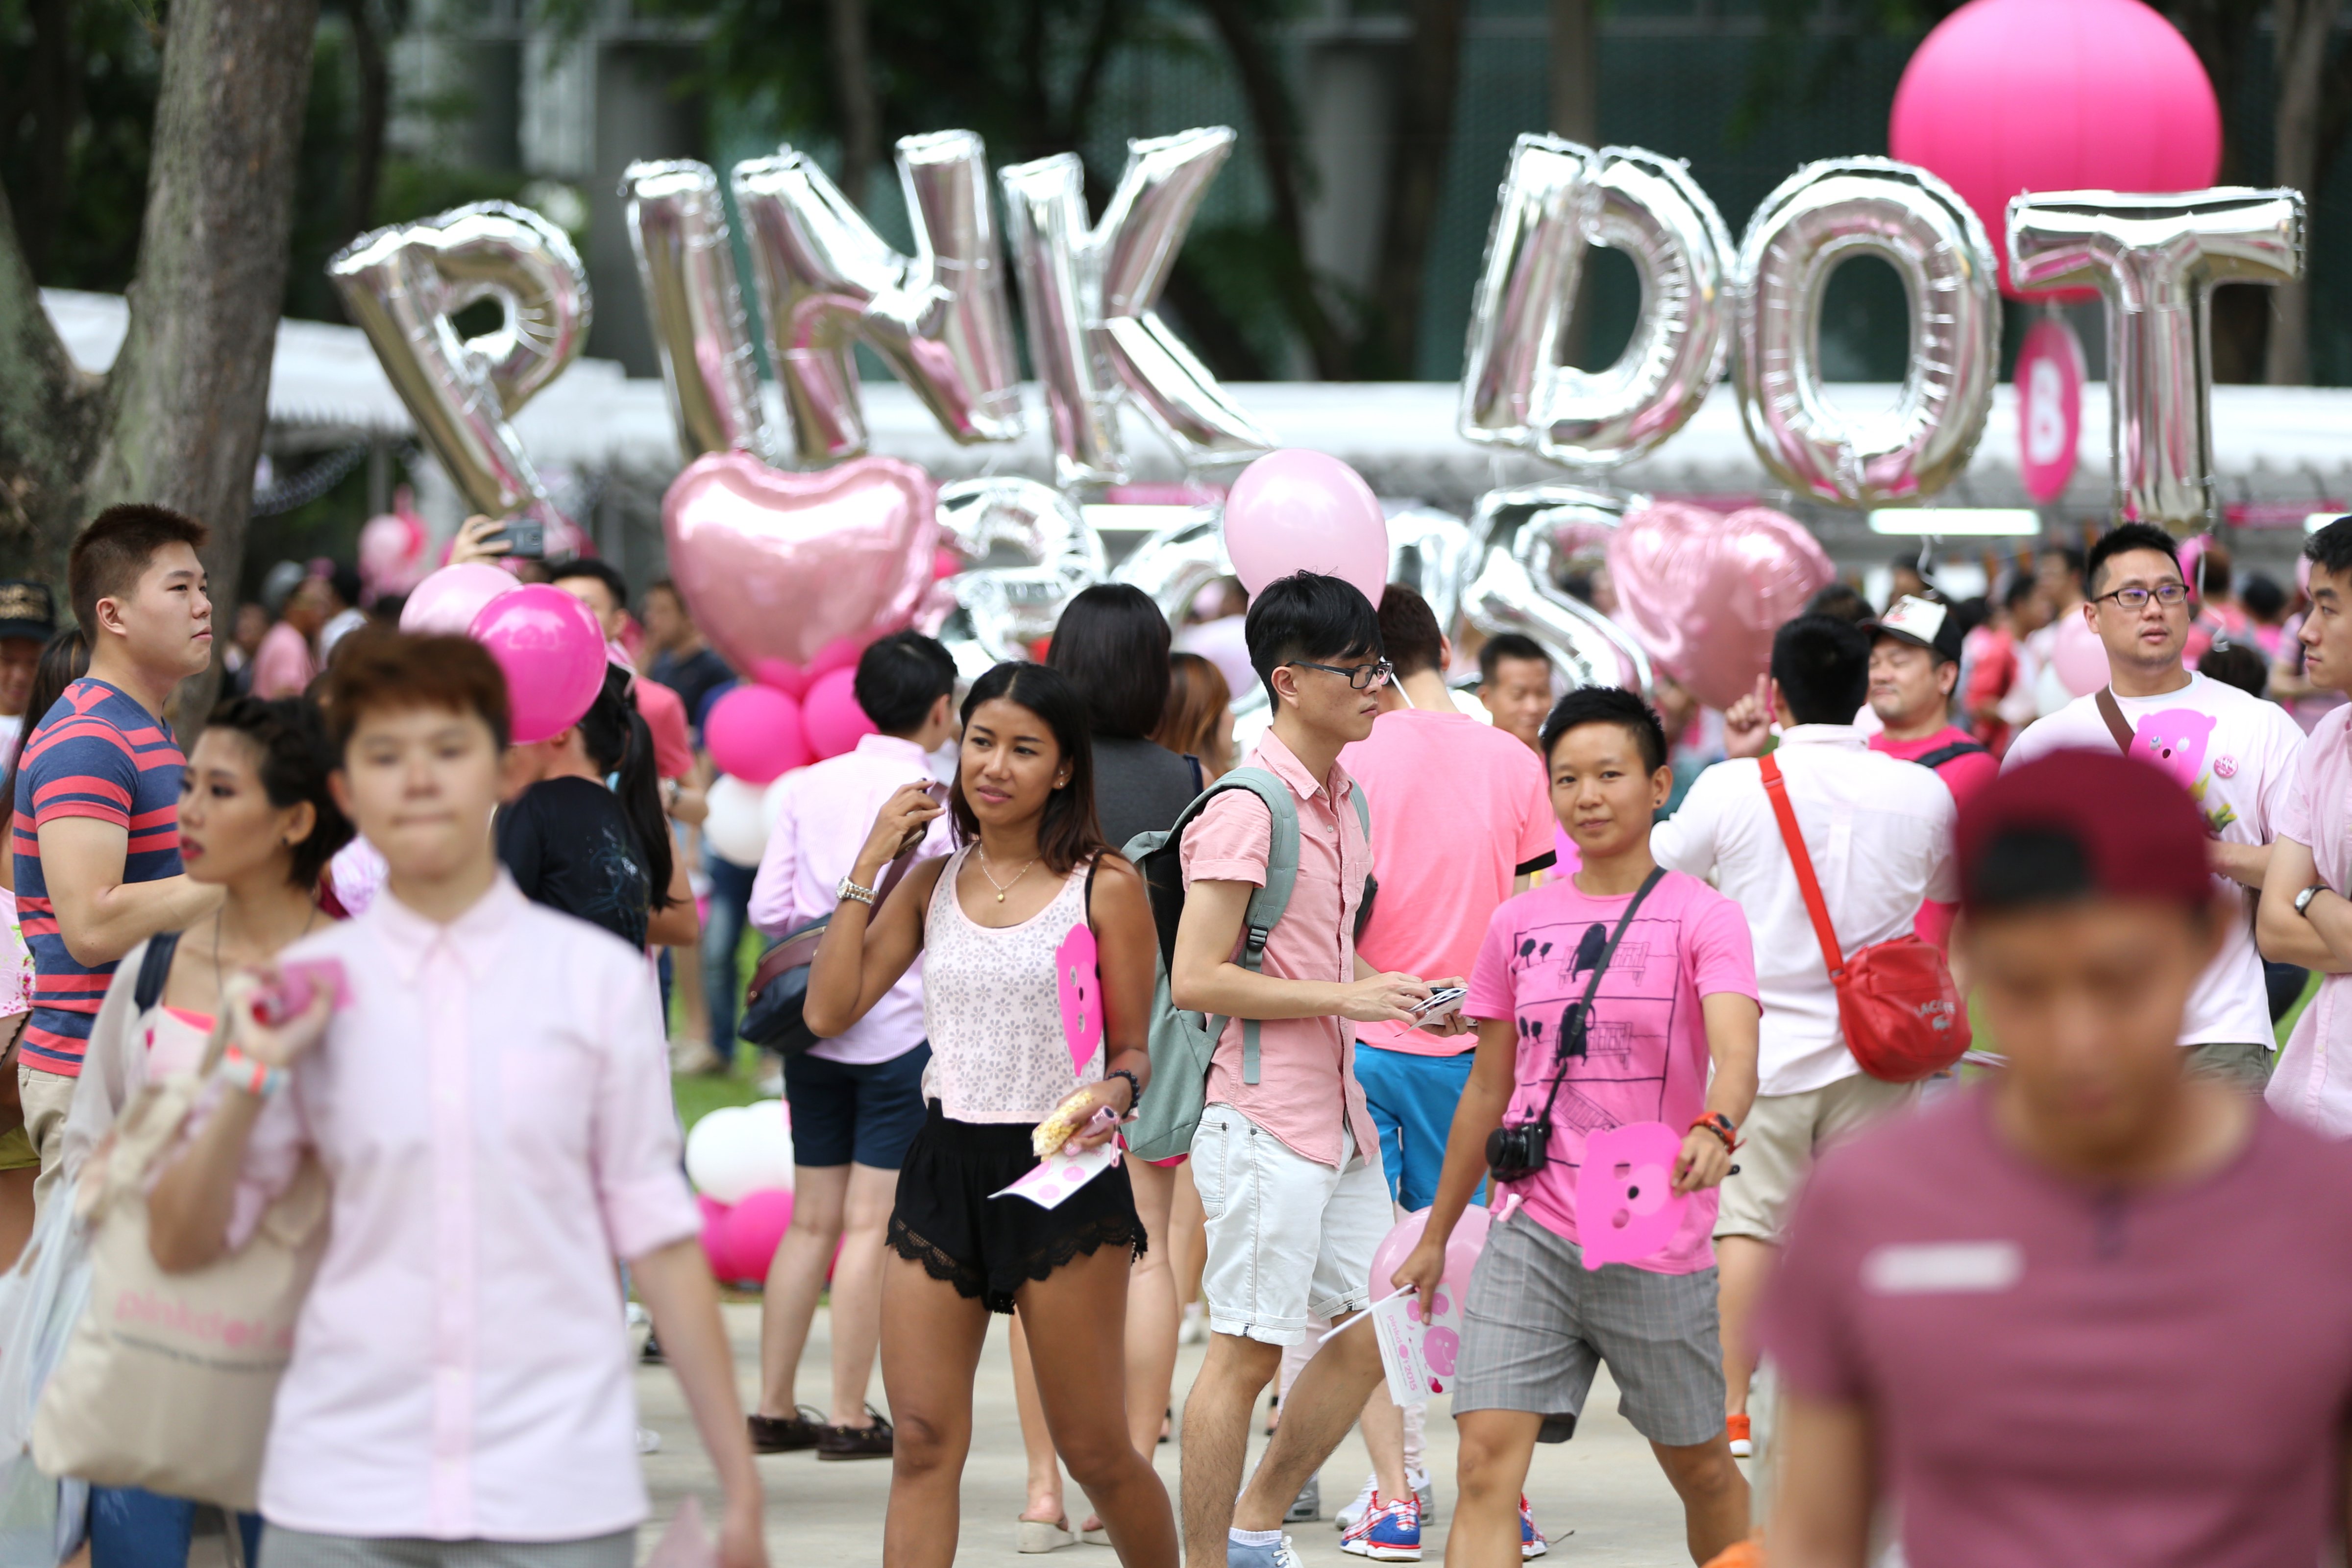 People dressed in various shades of pink attend Pink Dot SG on June 13, 2015 in Singapore (Lionel Ng&mdash;Getty Images)